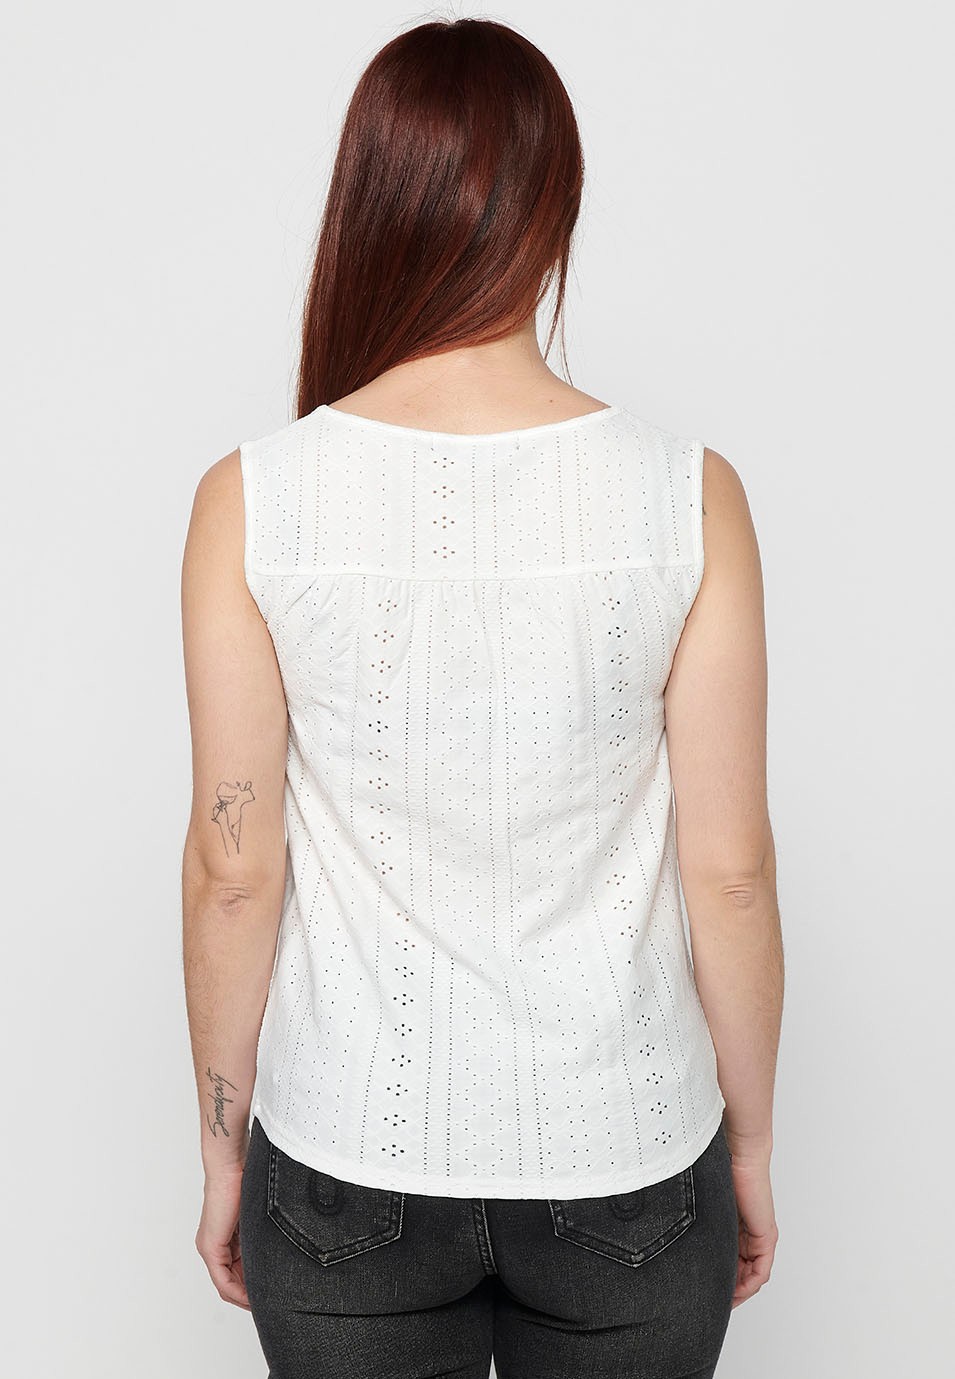 Sleeveless T-shirt, round neck with white opening for women 6